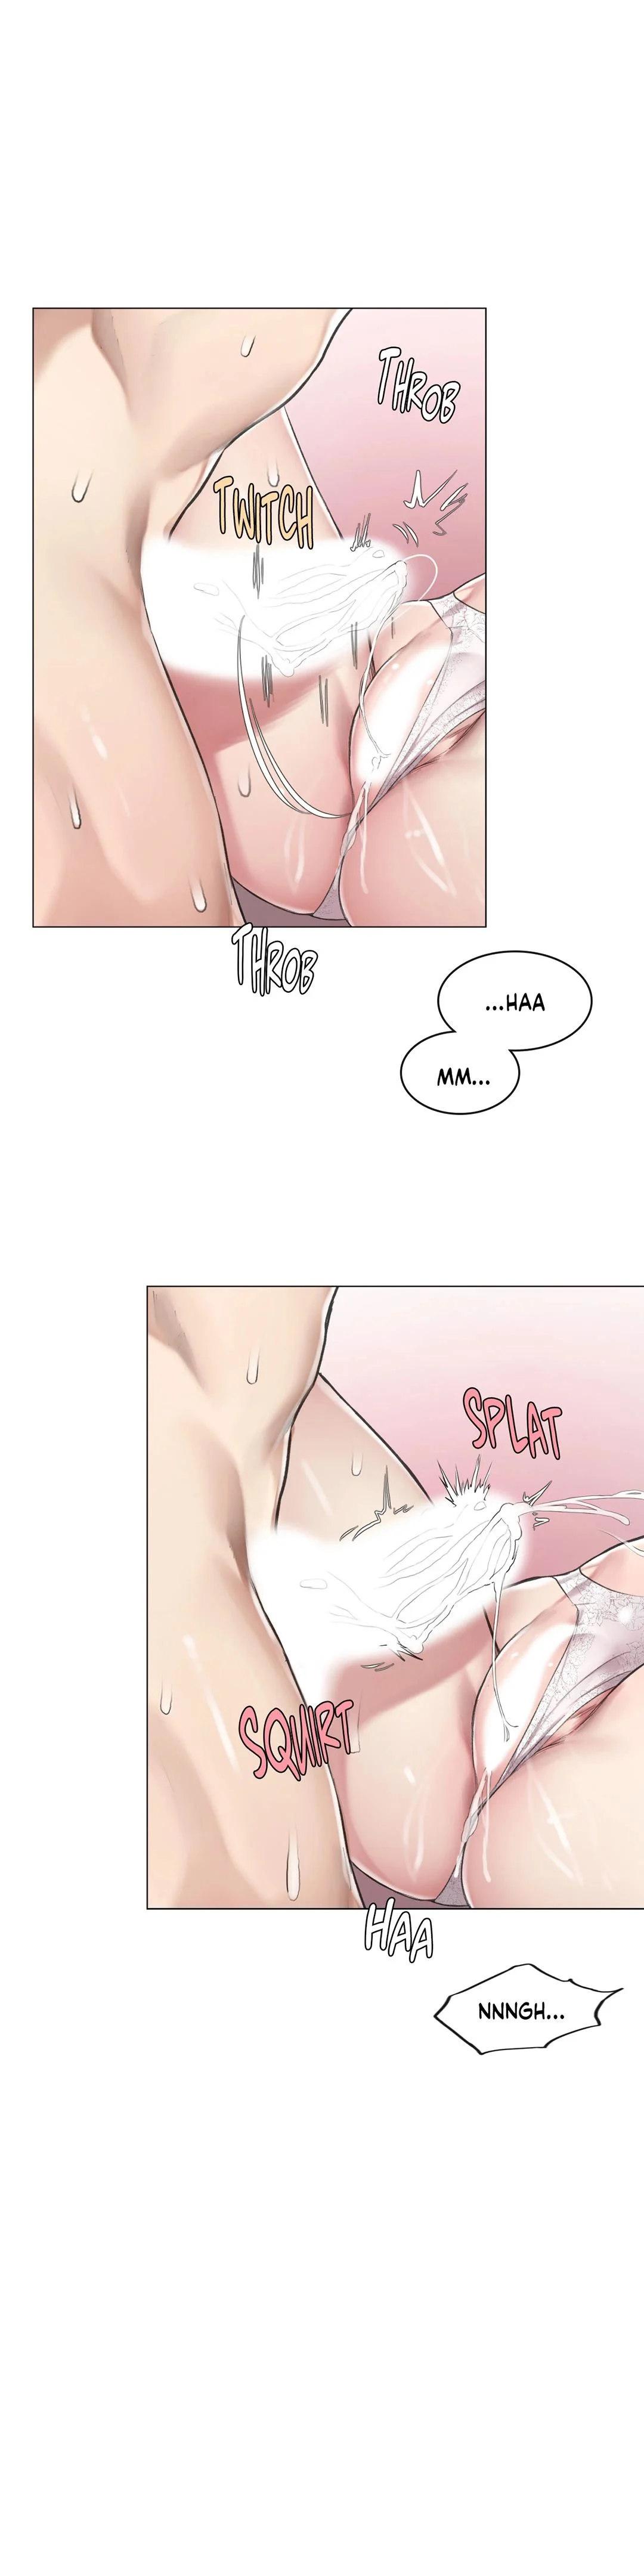 [Dumangoon, KONG_] Sexcape Room: Snap Off Ch.7/7 [English] [Manhwa PDF] Completed 125